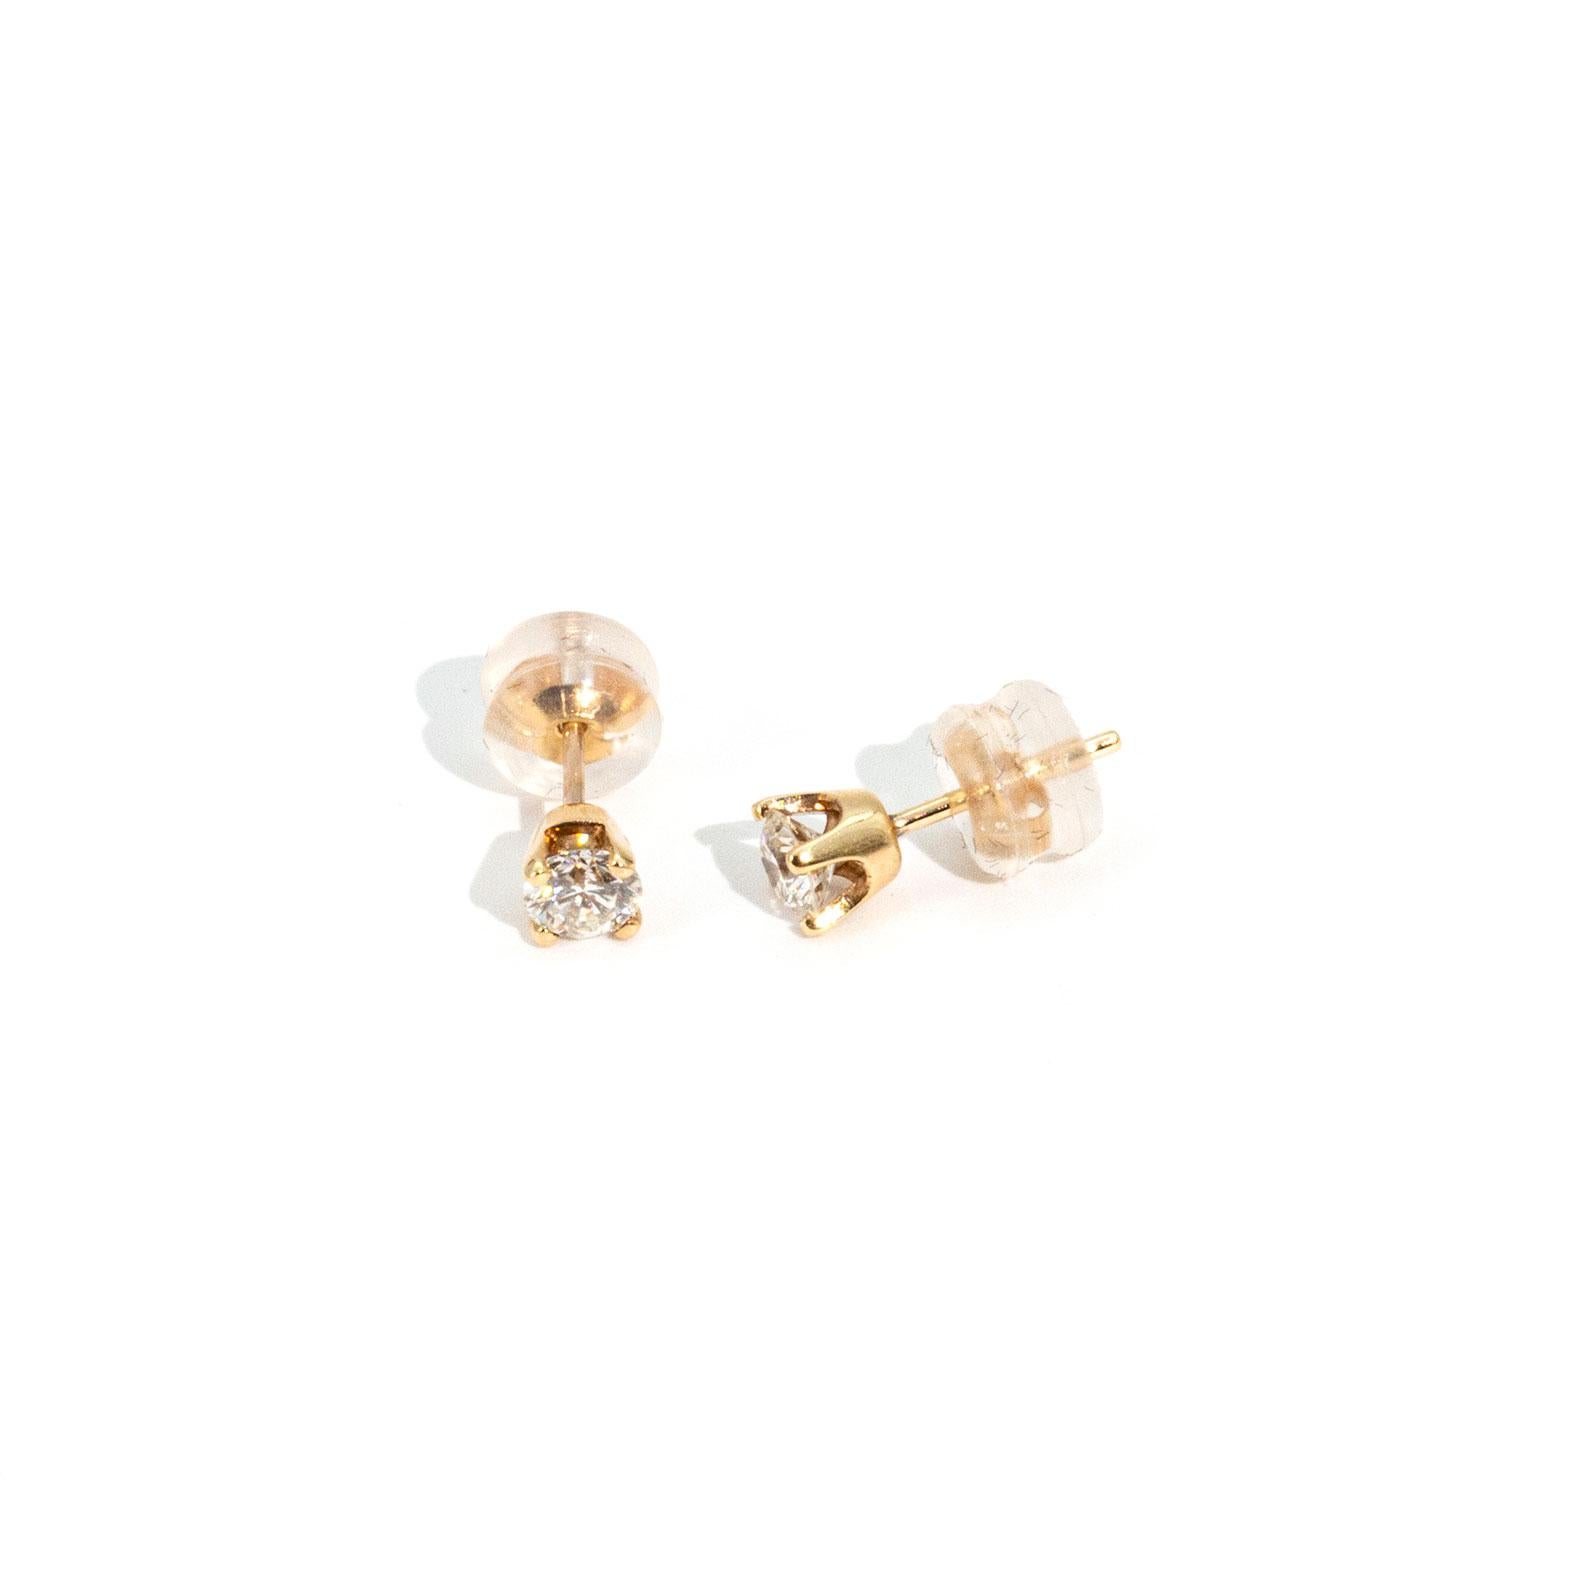 Crafted in 9 carat yellow gold is this classically elegant pair of stud style earrings that feaure two round brilliant cut diamonds totalling 0.60 carats.  The studs are finished with standard 9 carat posts and 10 carat yellow gold butterfly